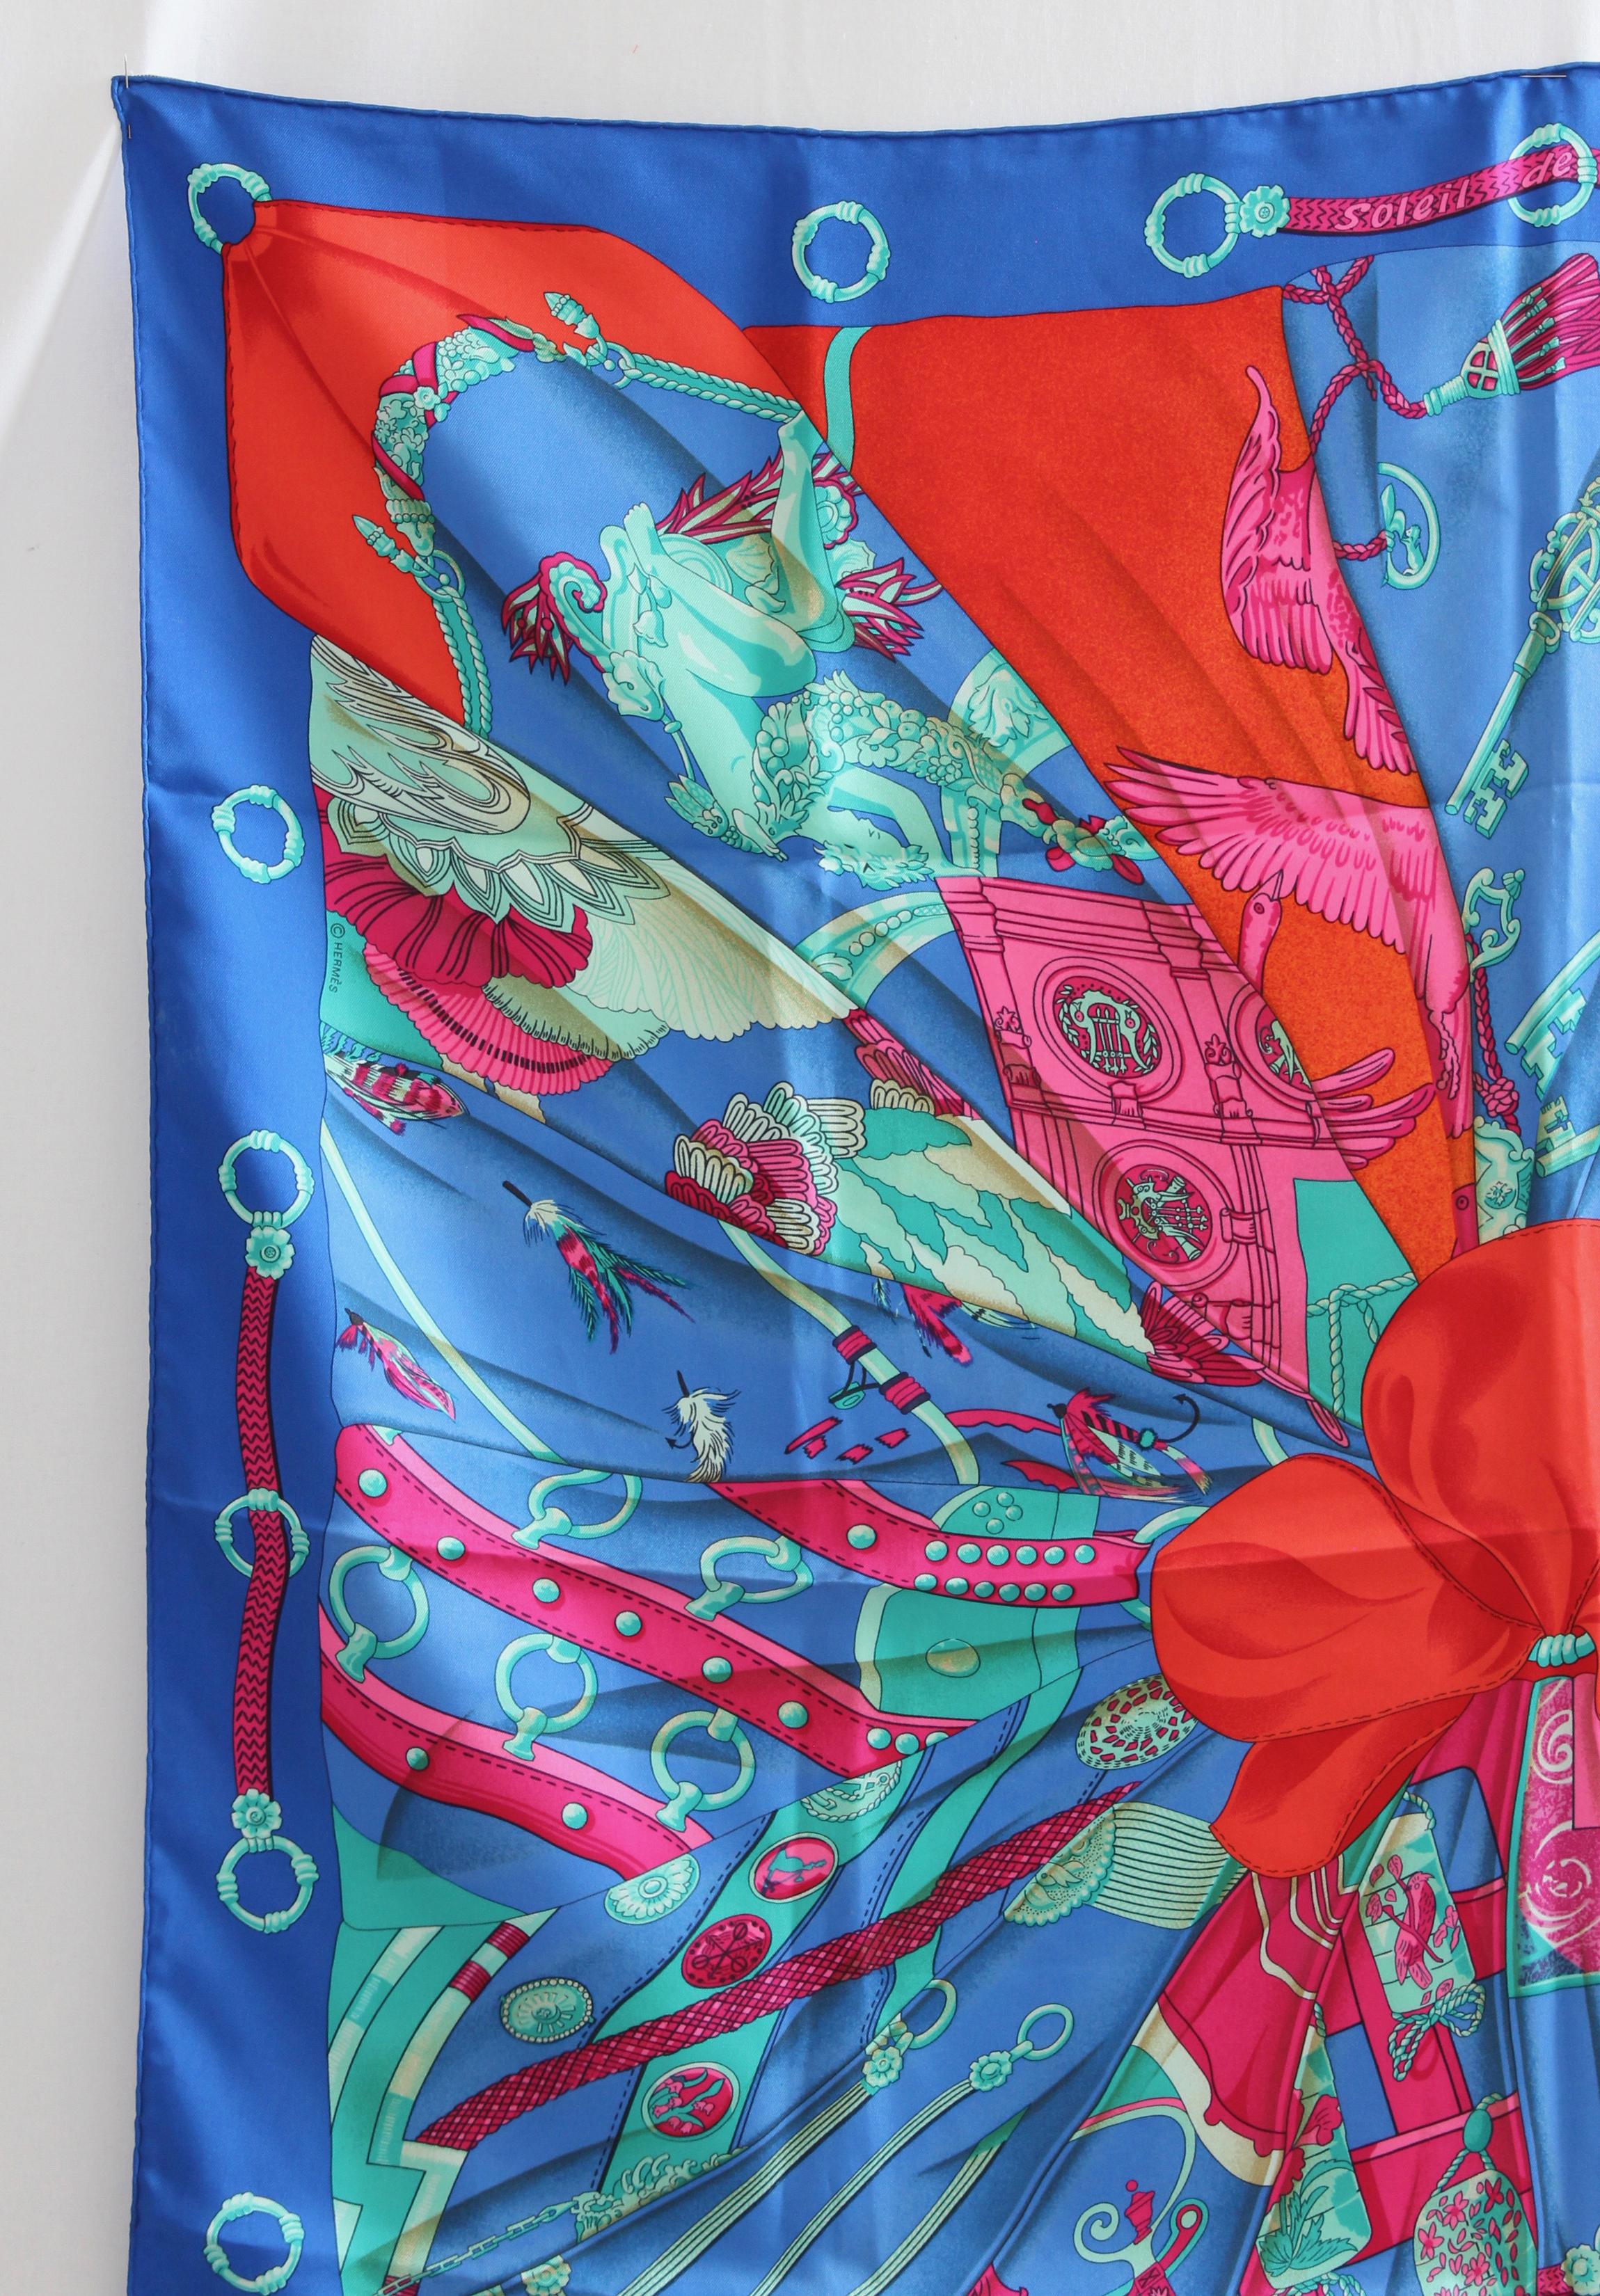 This fabulous silk scarf or shawl was designed by Caty Latham for Hermes and released in 1995 and is so hard to find in this colorway.  Latham's history designing for the house covers more than 5 decades, and she's designed almost 50 gorgeous carres